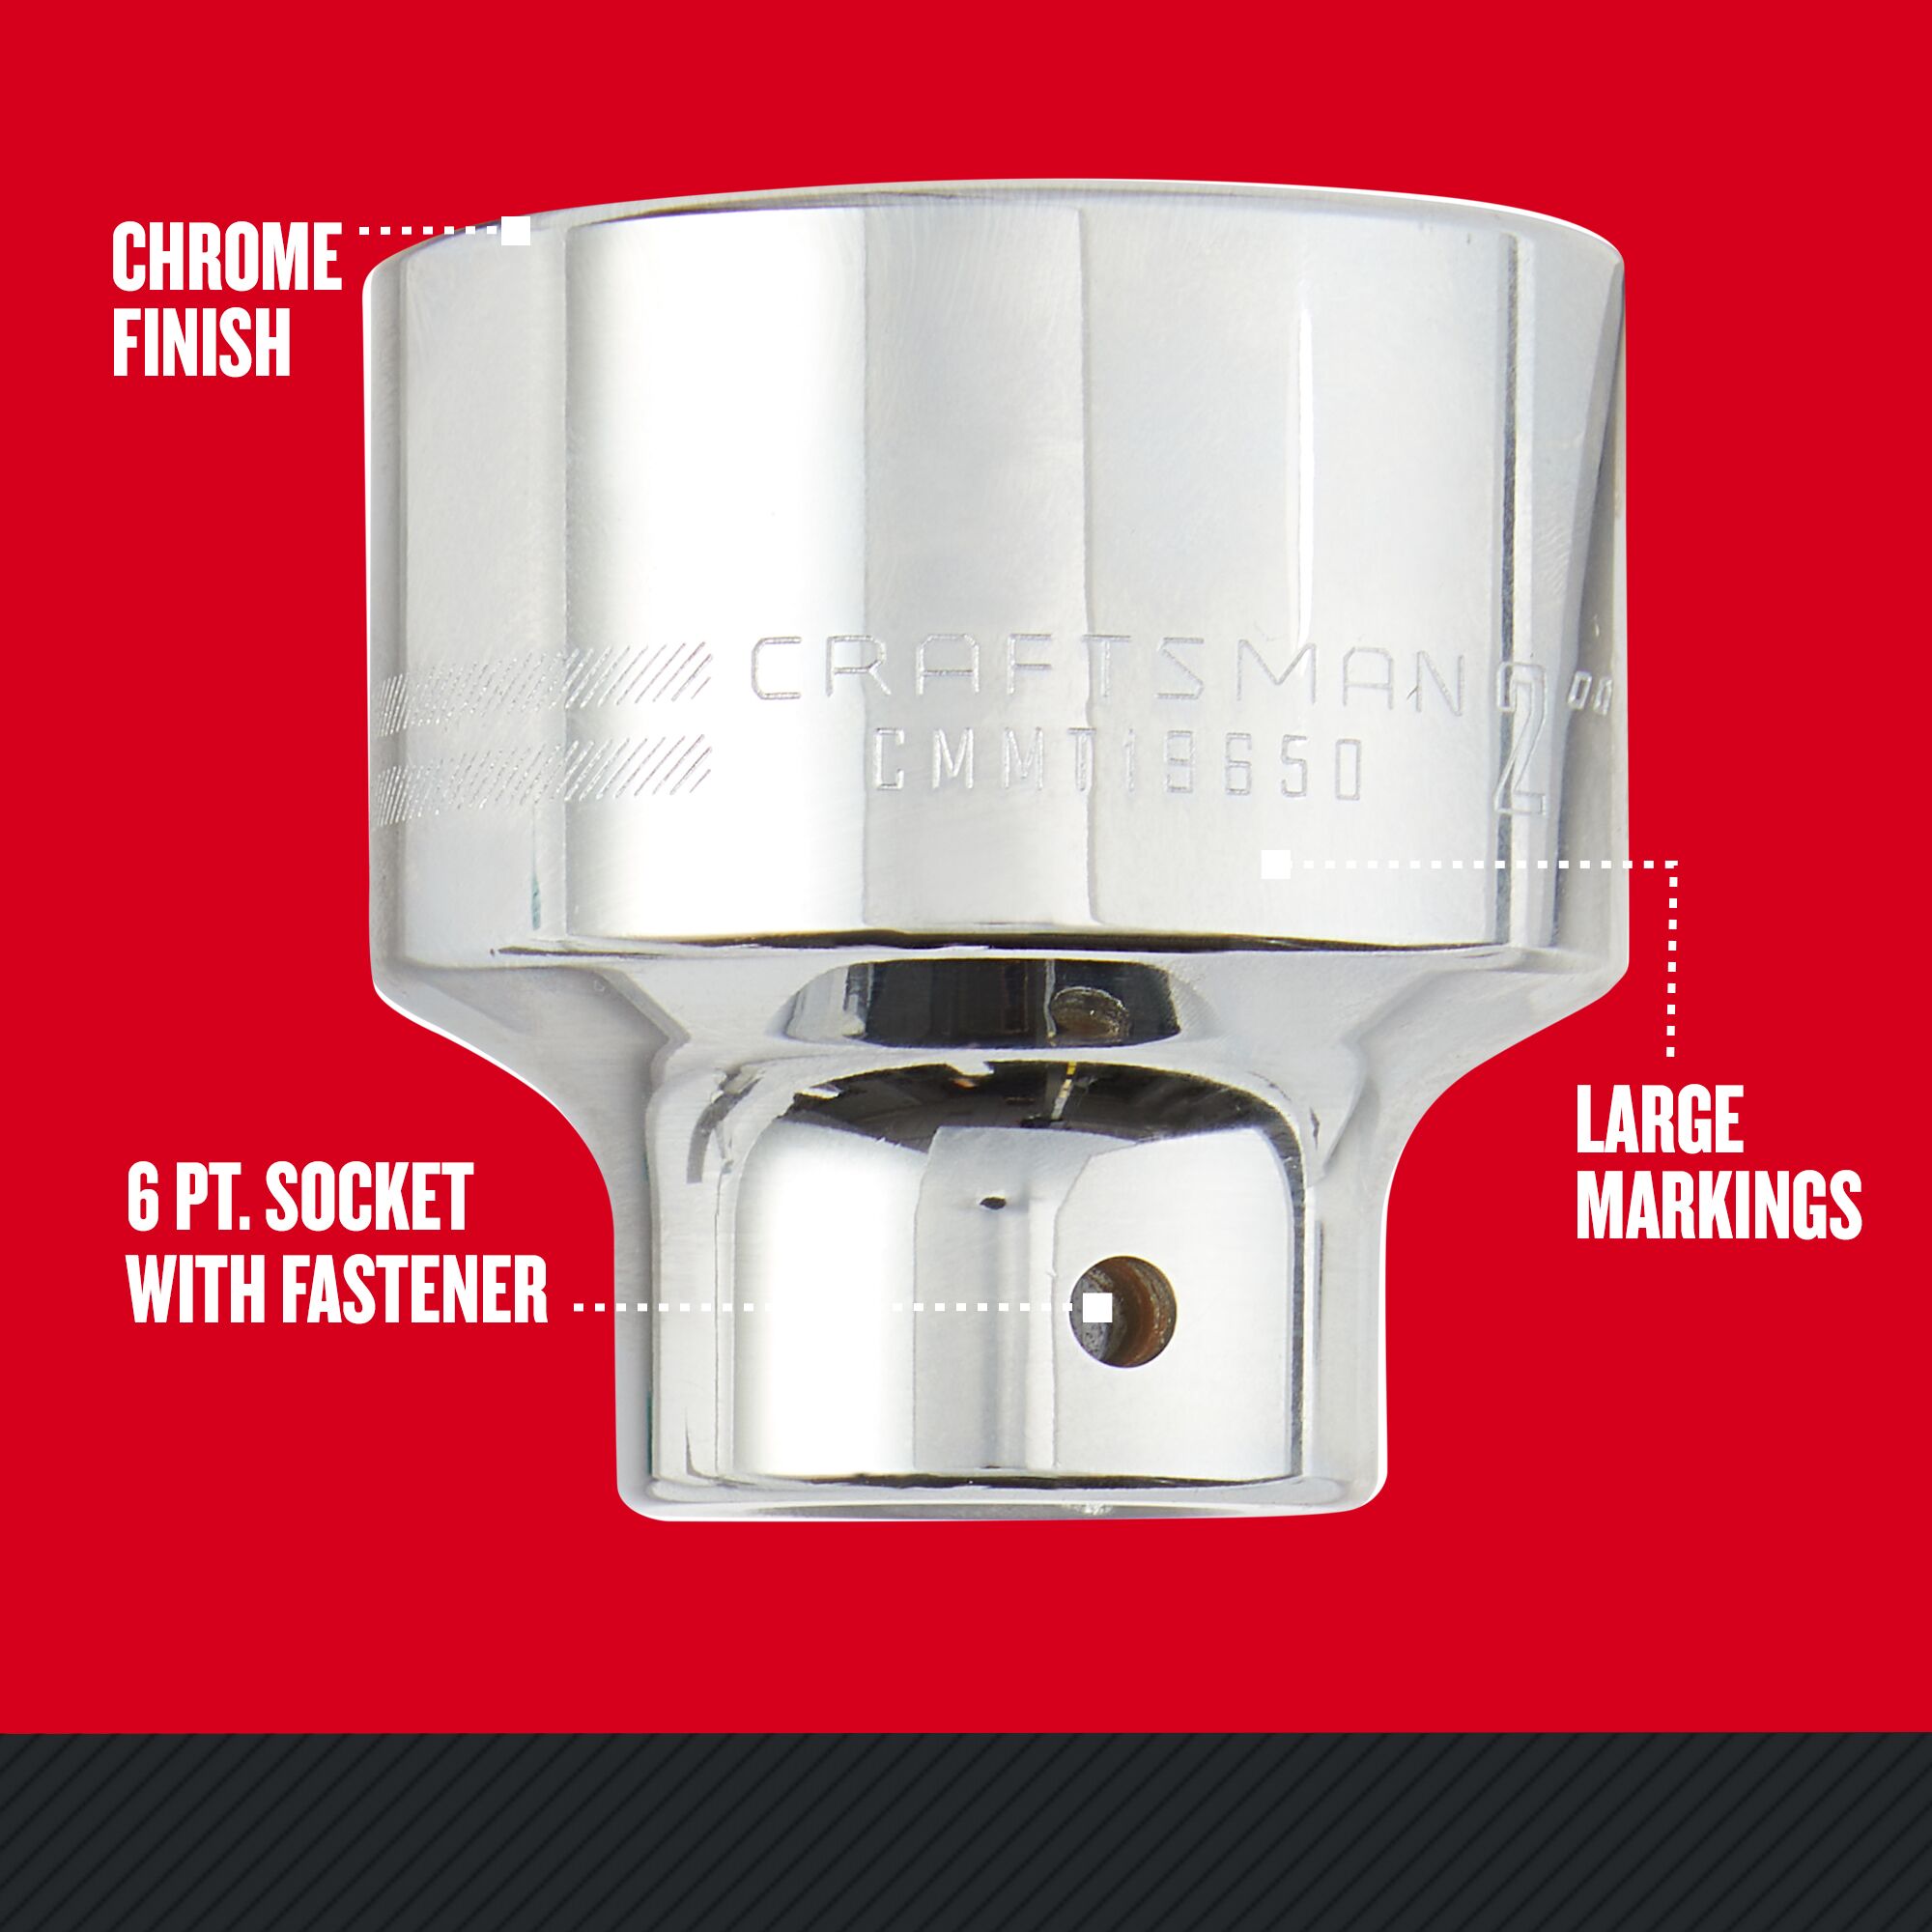 Graphic of CRAFTSMAN Sockets: Bit Sockets highlighting product features